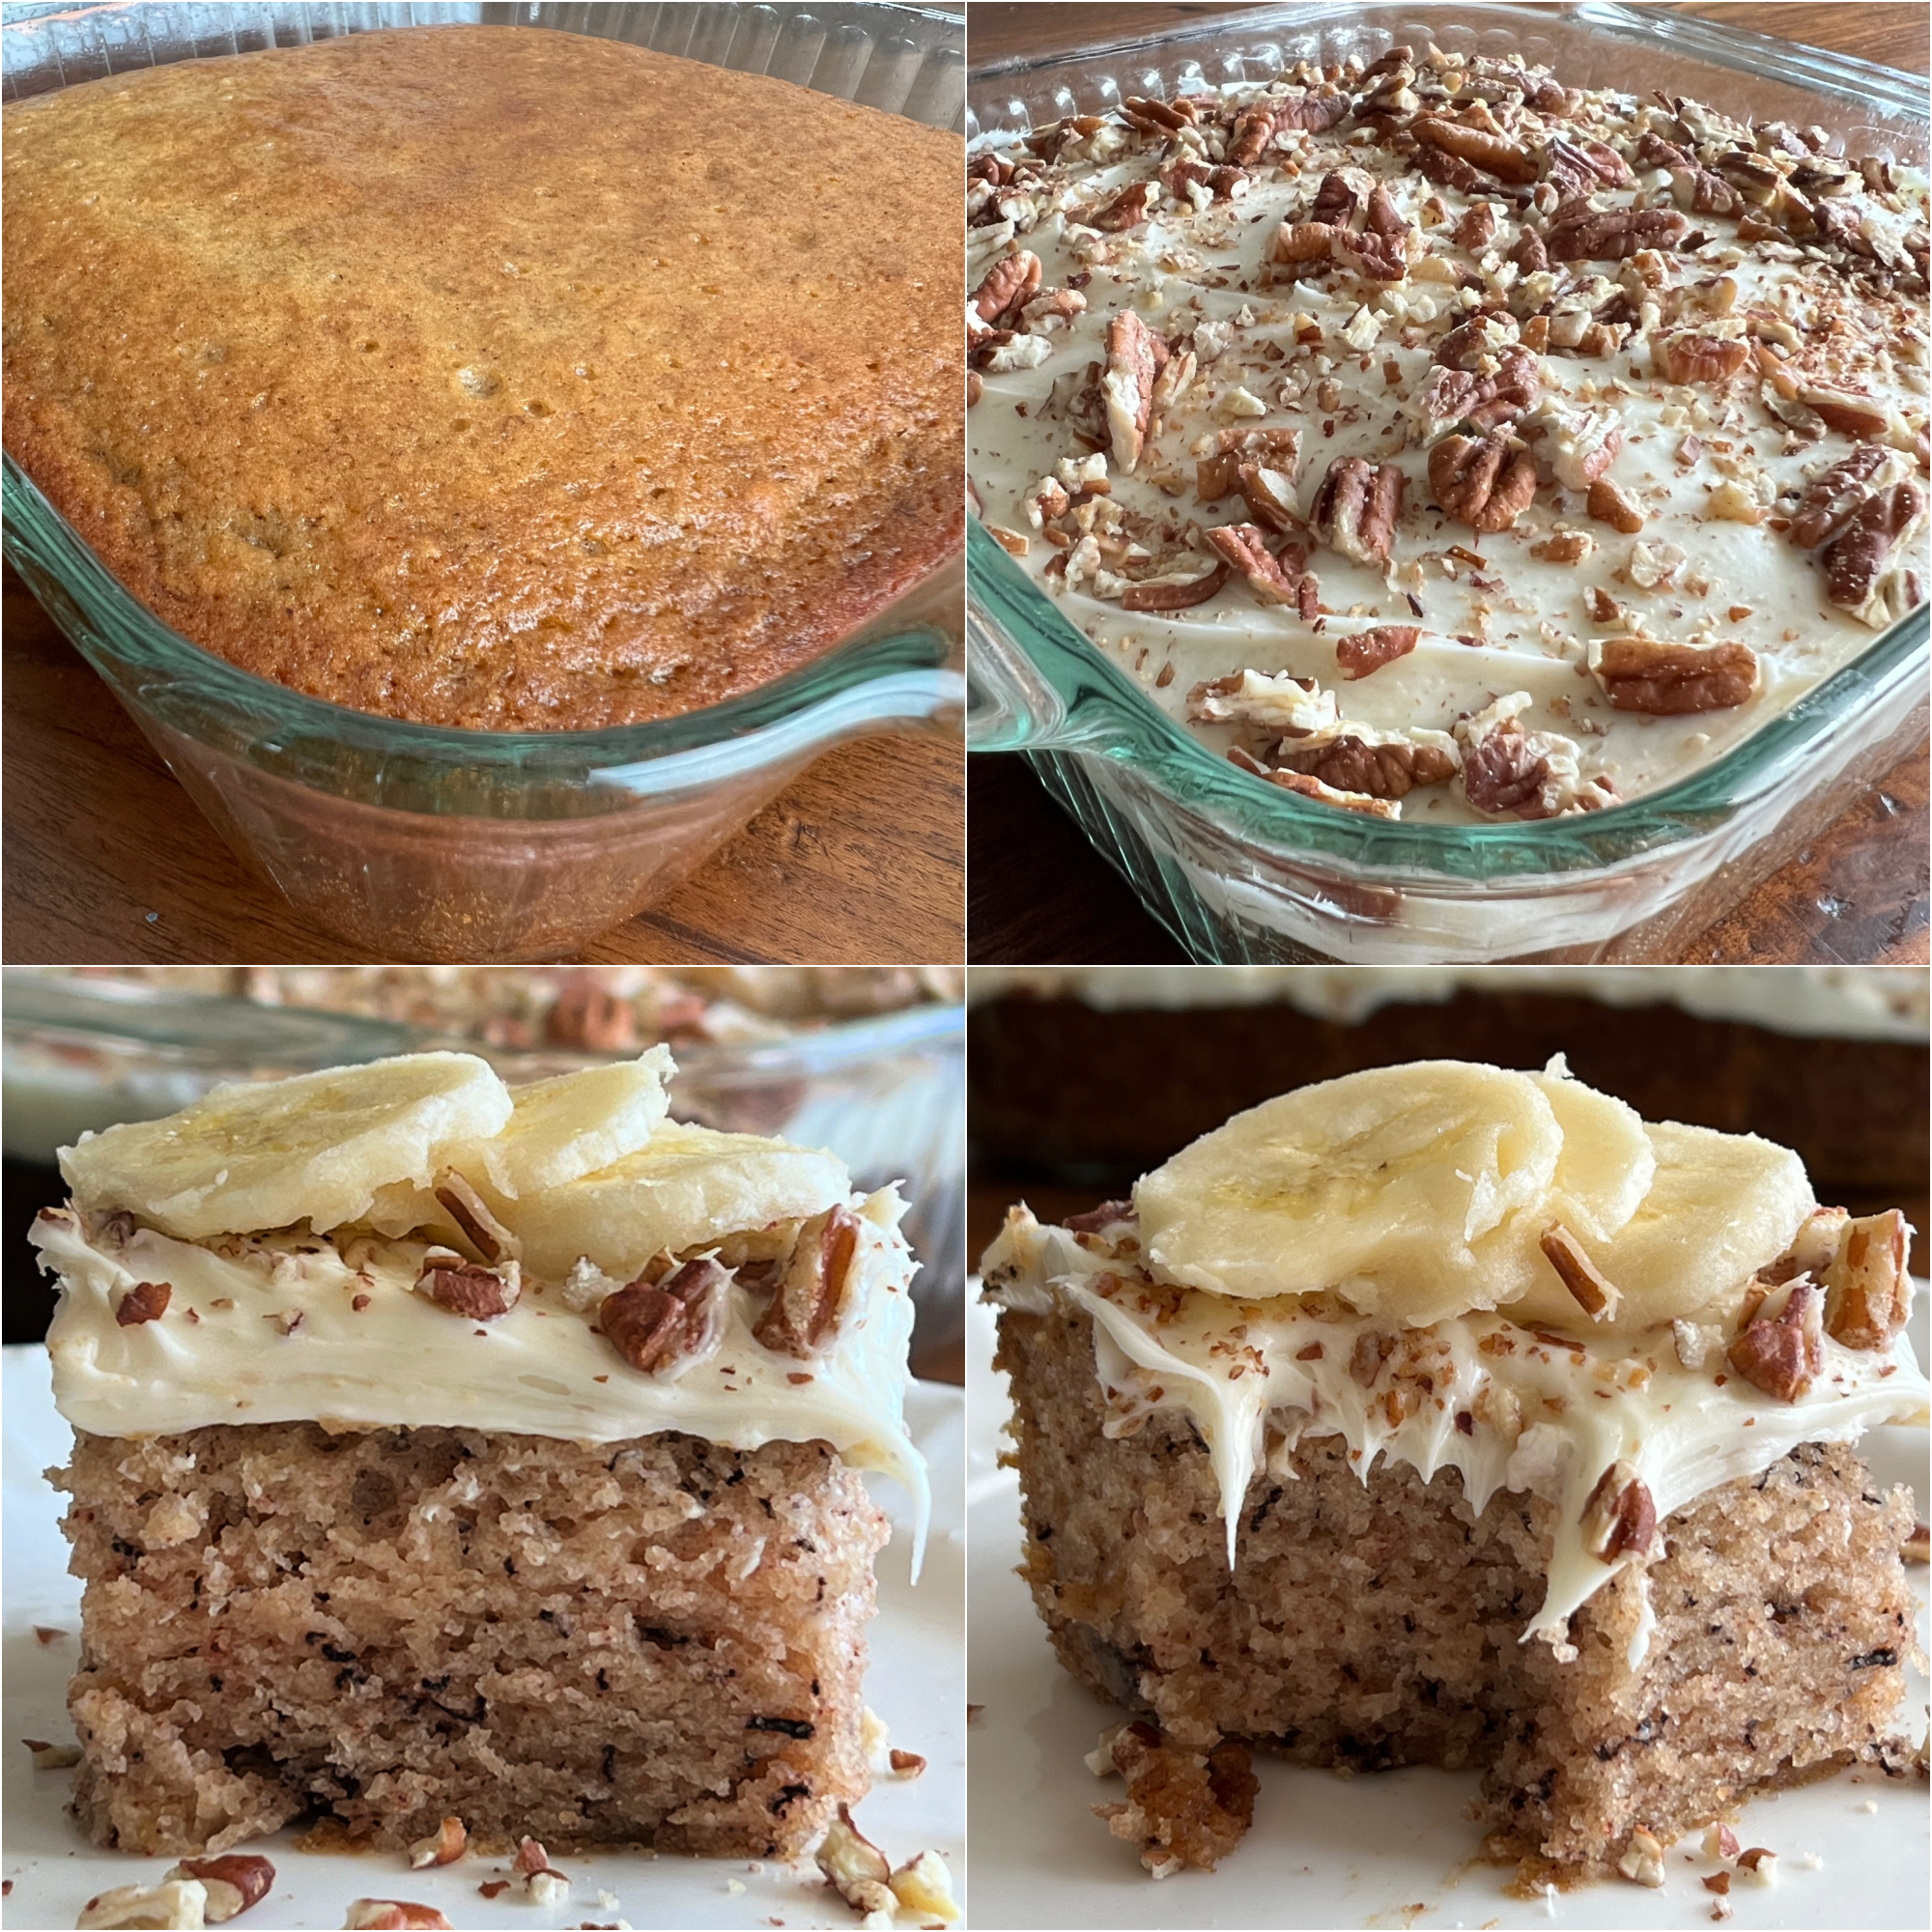 This is a 4 photo collage showing the banana bread crazy cake without vanilla frosting and chopped pecans. Another photo shows the cake with vanilla frosting, chopped pecans and fresh sliced bananas. There is also a photo showing a piece of the cake on a place with a bite take from the cake.